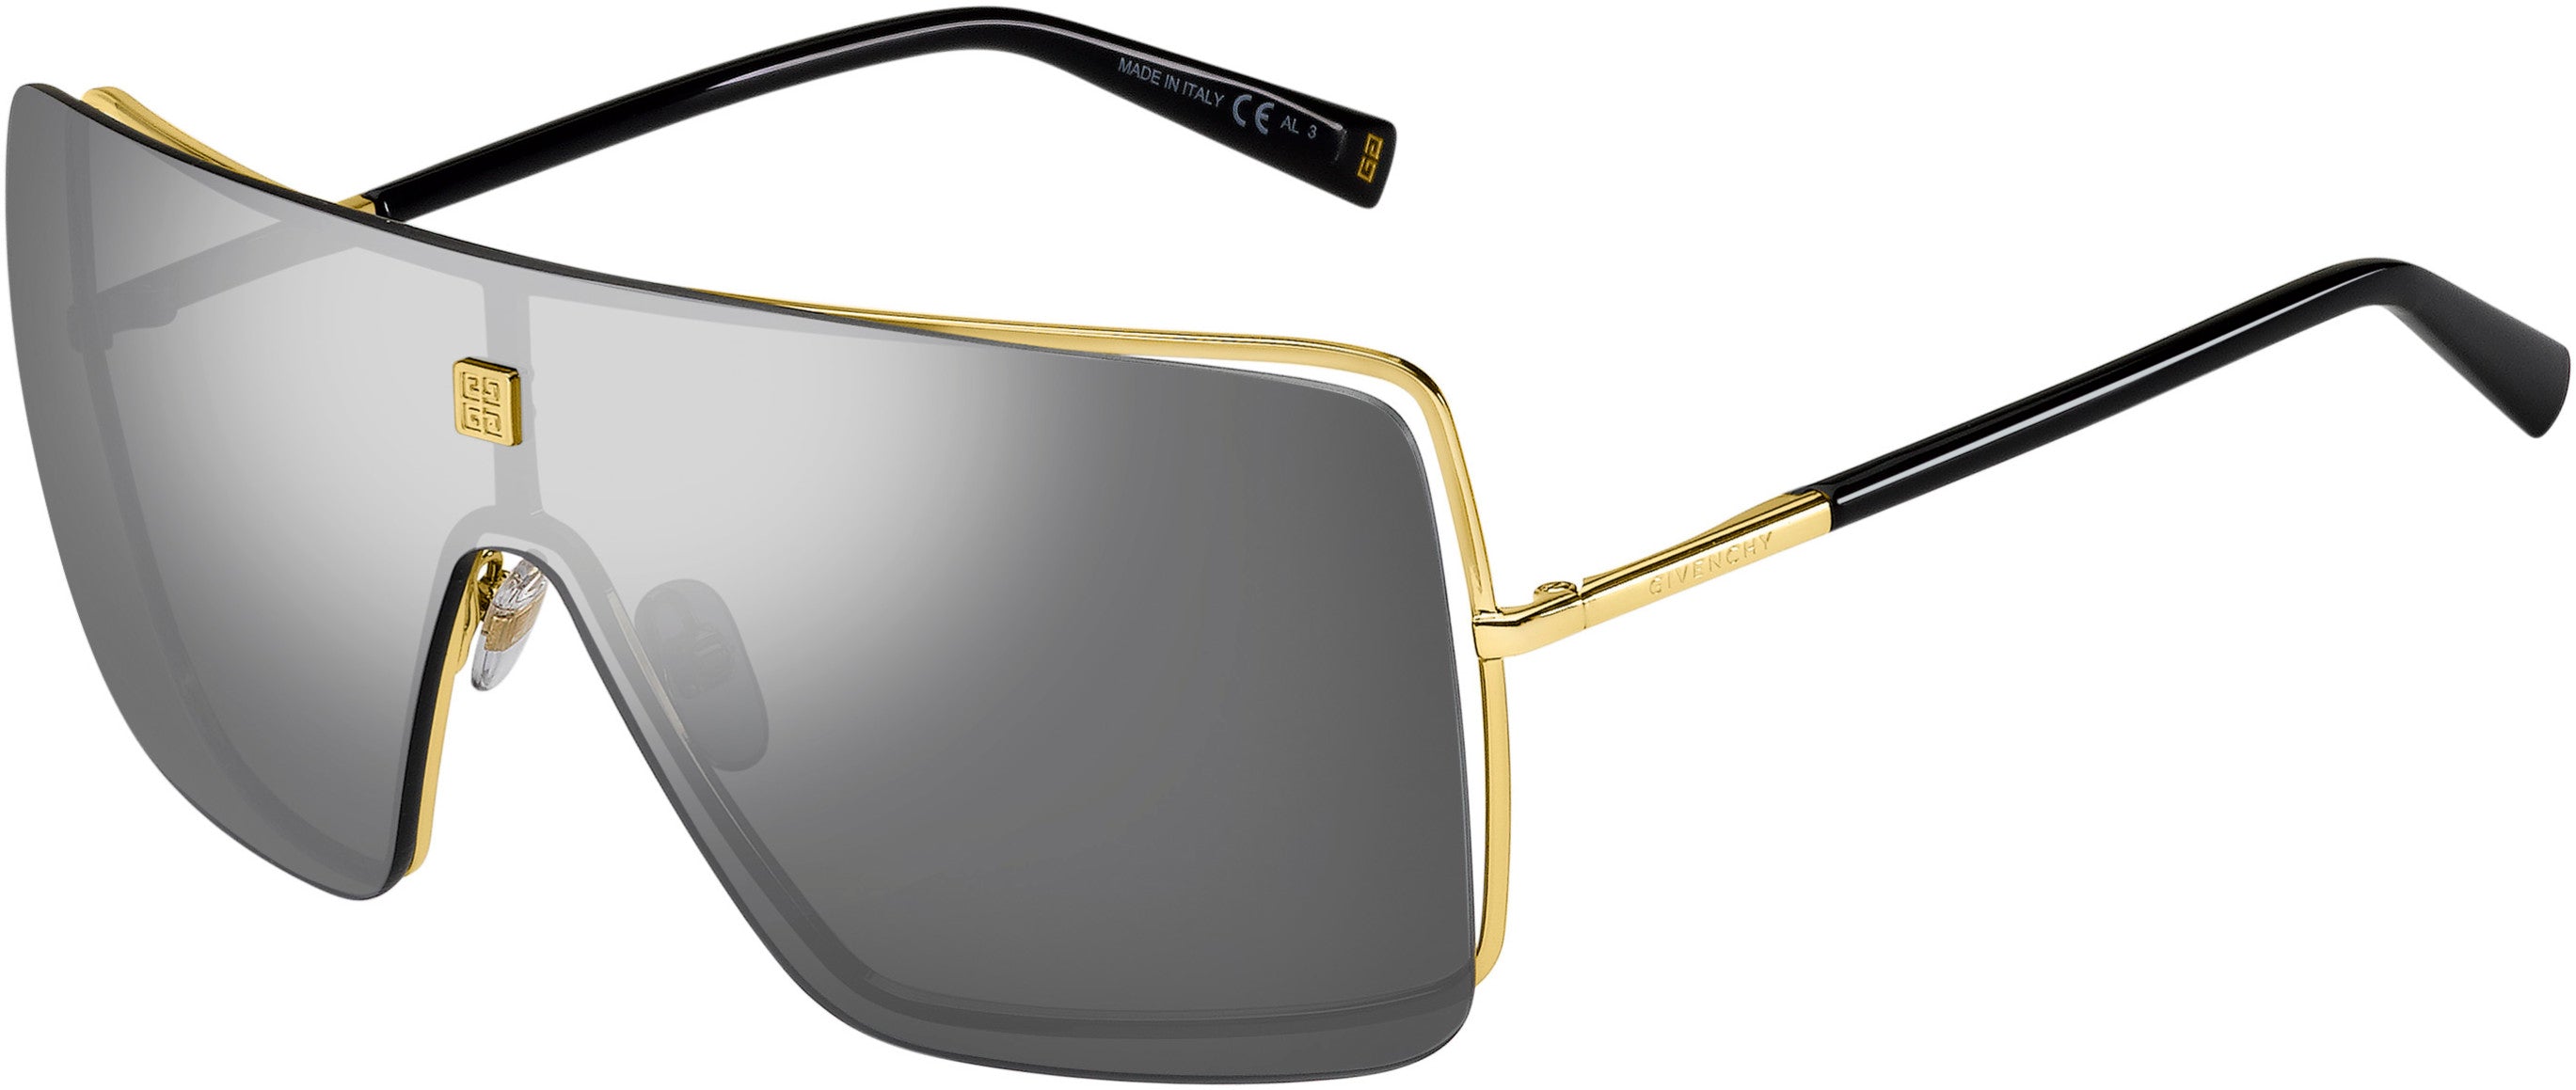  Givenchy 7167/S Rectangular Sunglasses 083I-083I  Gold Silver (T4 Silver Mirror)